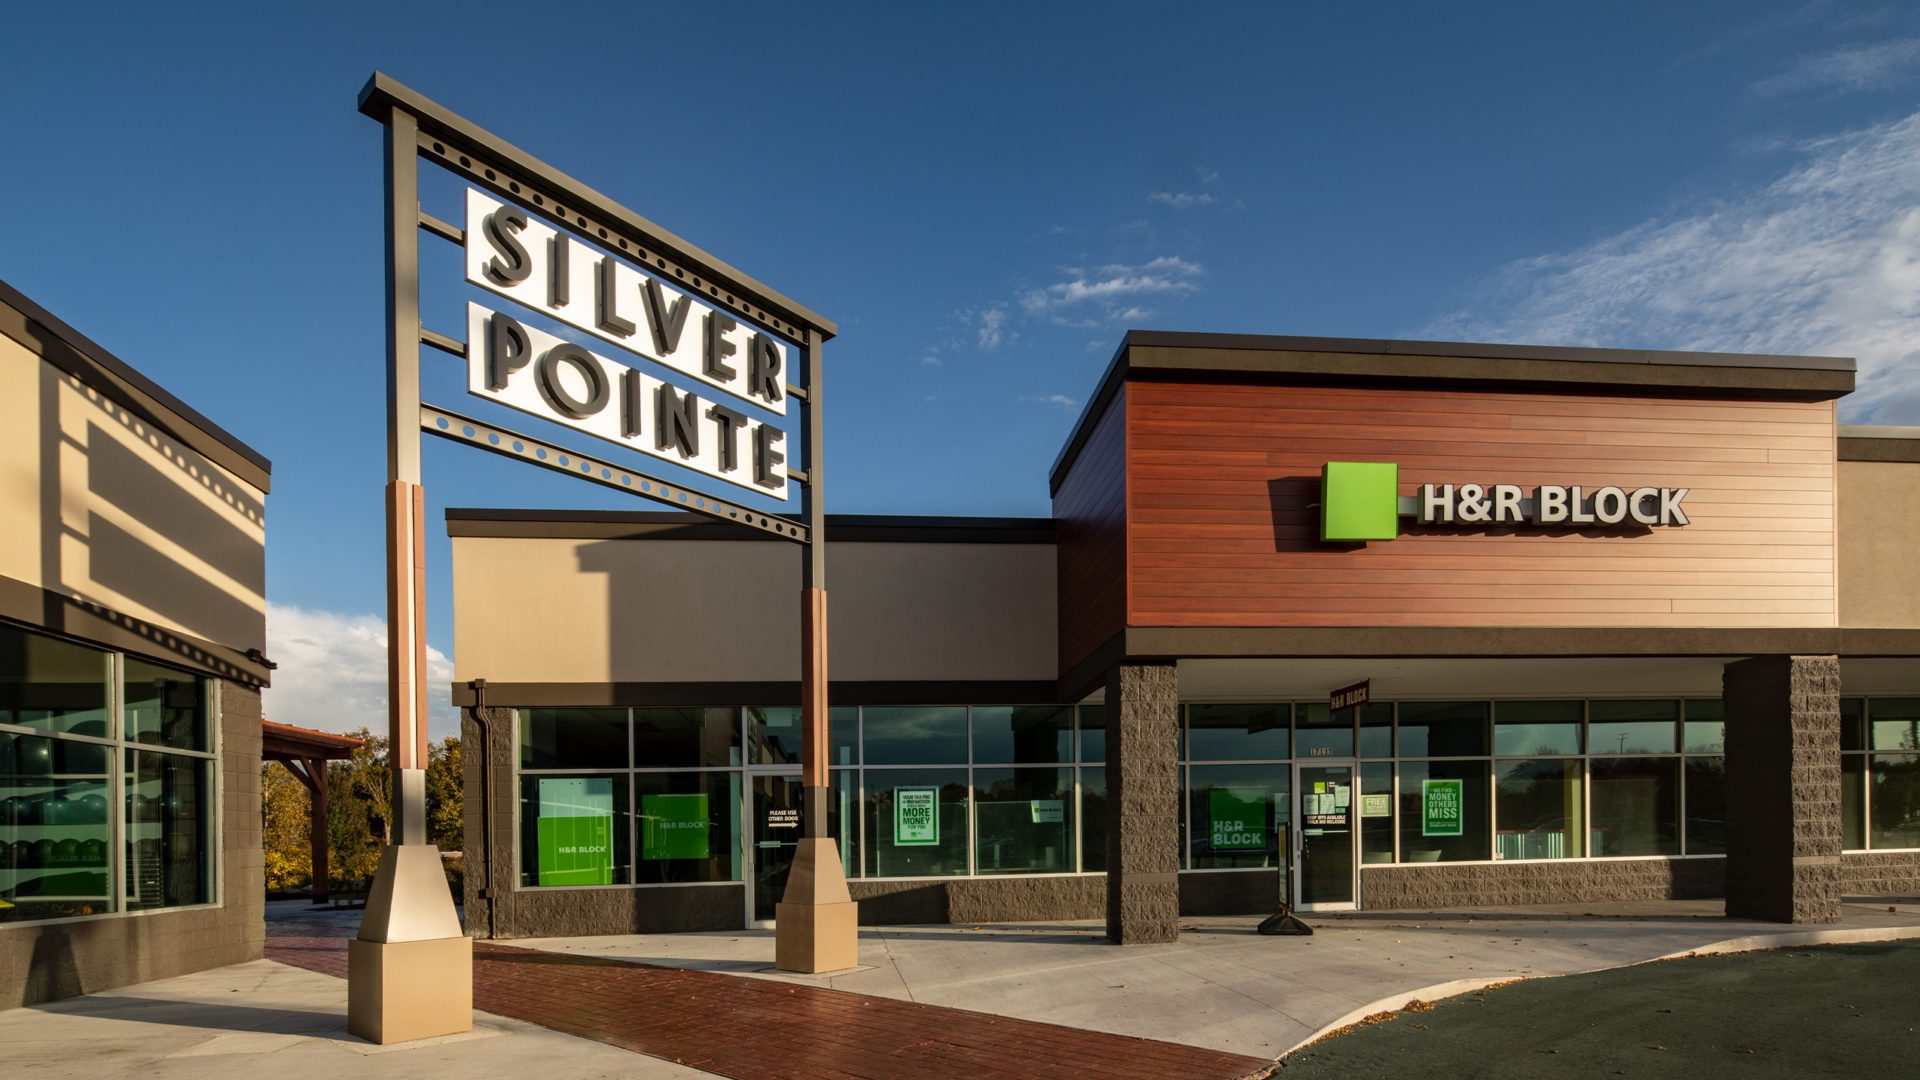 Silver Pointe Shopping Center Exterior. Brick plaza with tall sign that says Silver Pointe Shopping Center and another saying H&R Block